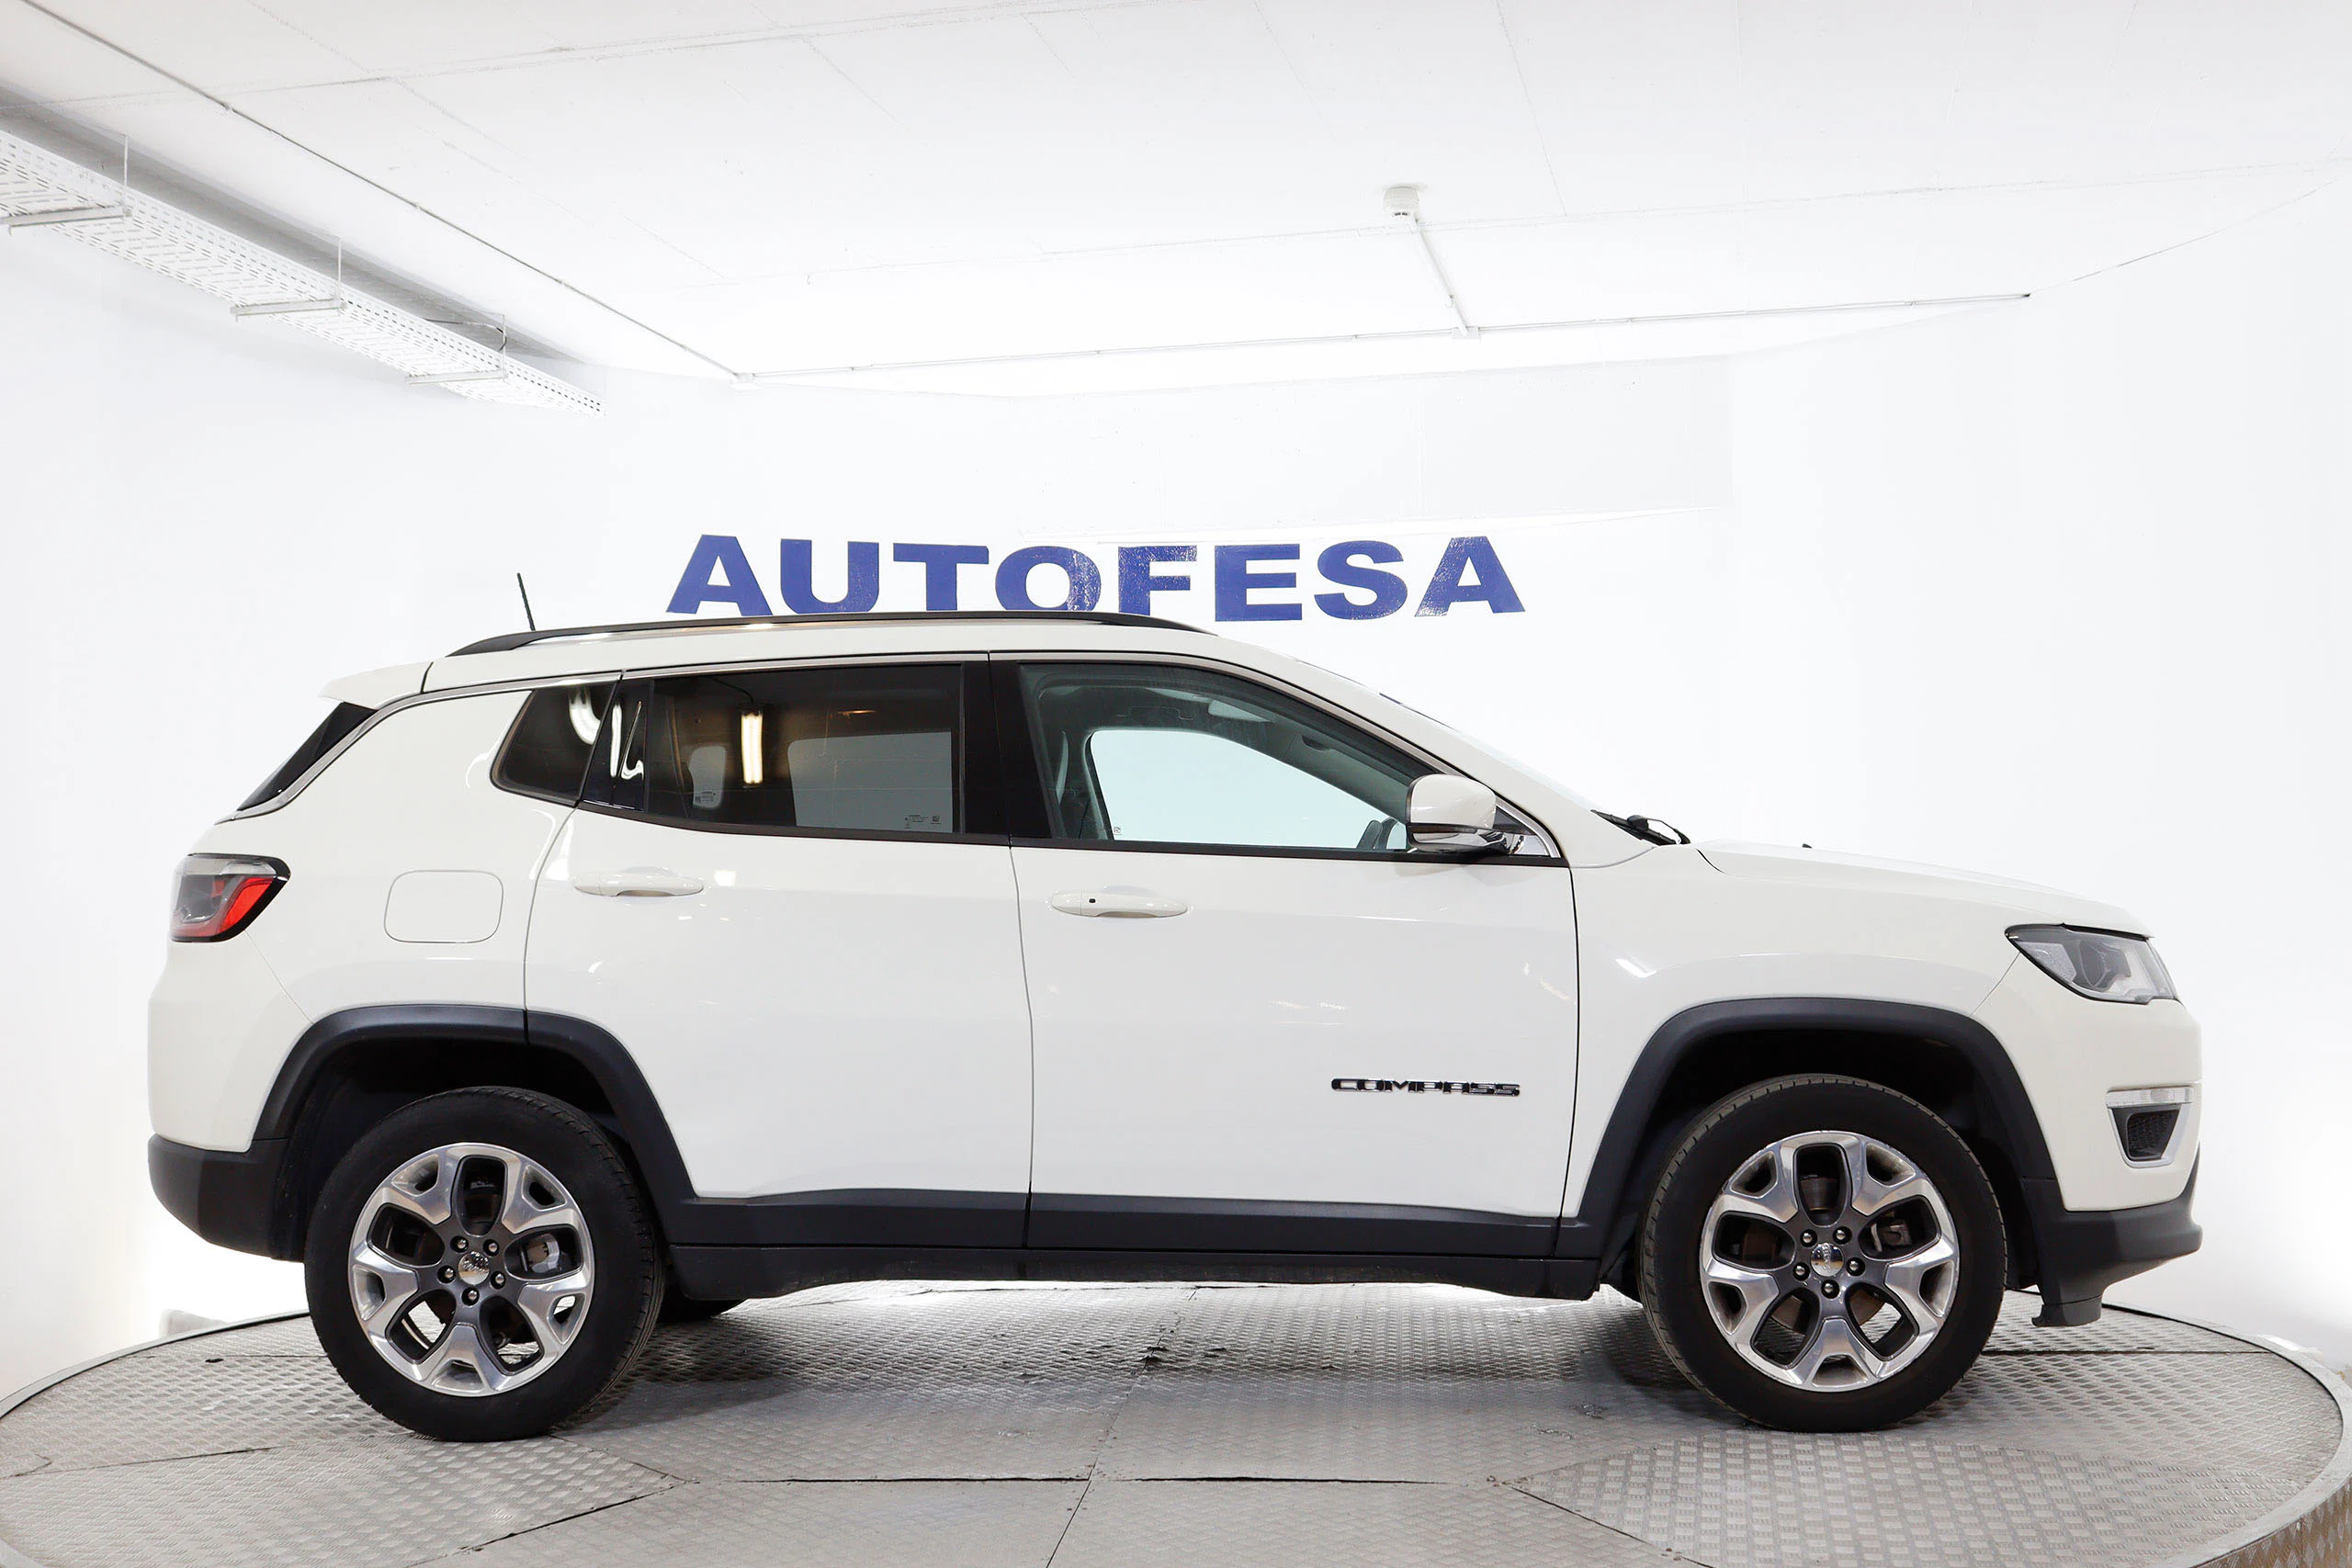 Jeep Compass 2.0 Limited 4X4 170cv Auto 5P S/S # IVA DEDUCIBLE, NAVY, FAROS LED, PARKTRONIC - Foto 10